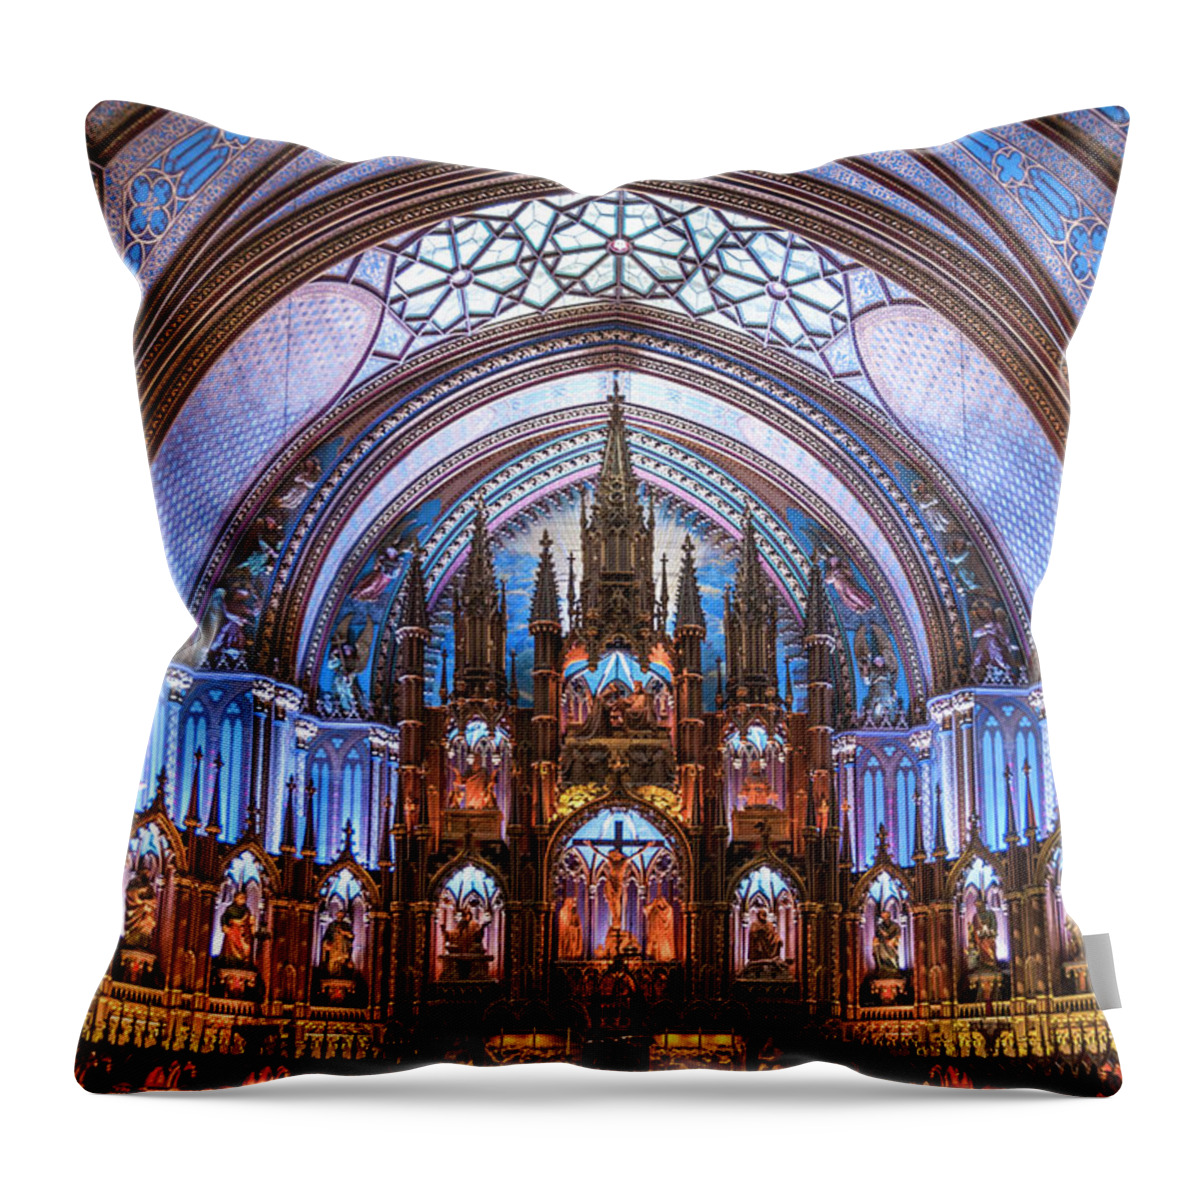 Notre Dame Throw Pillow featuring the photograph Notre Dame Basilica by Ginger Stein